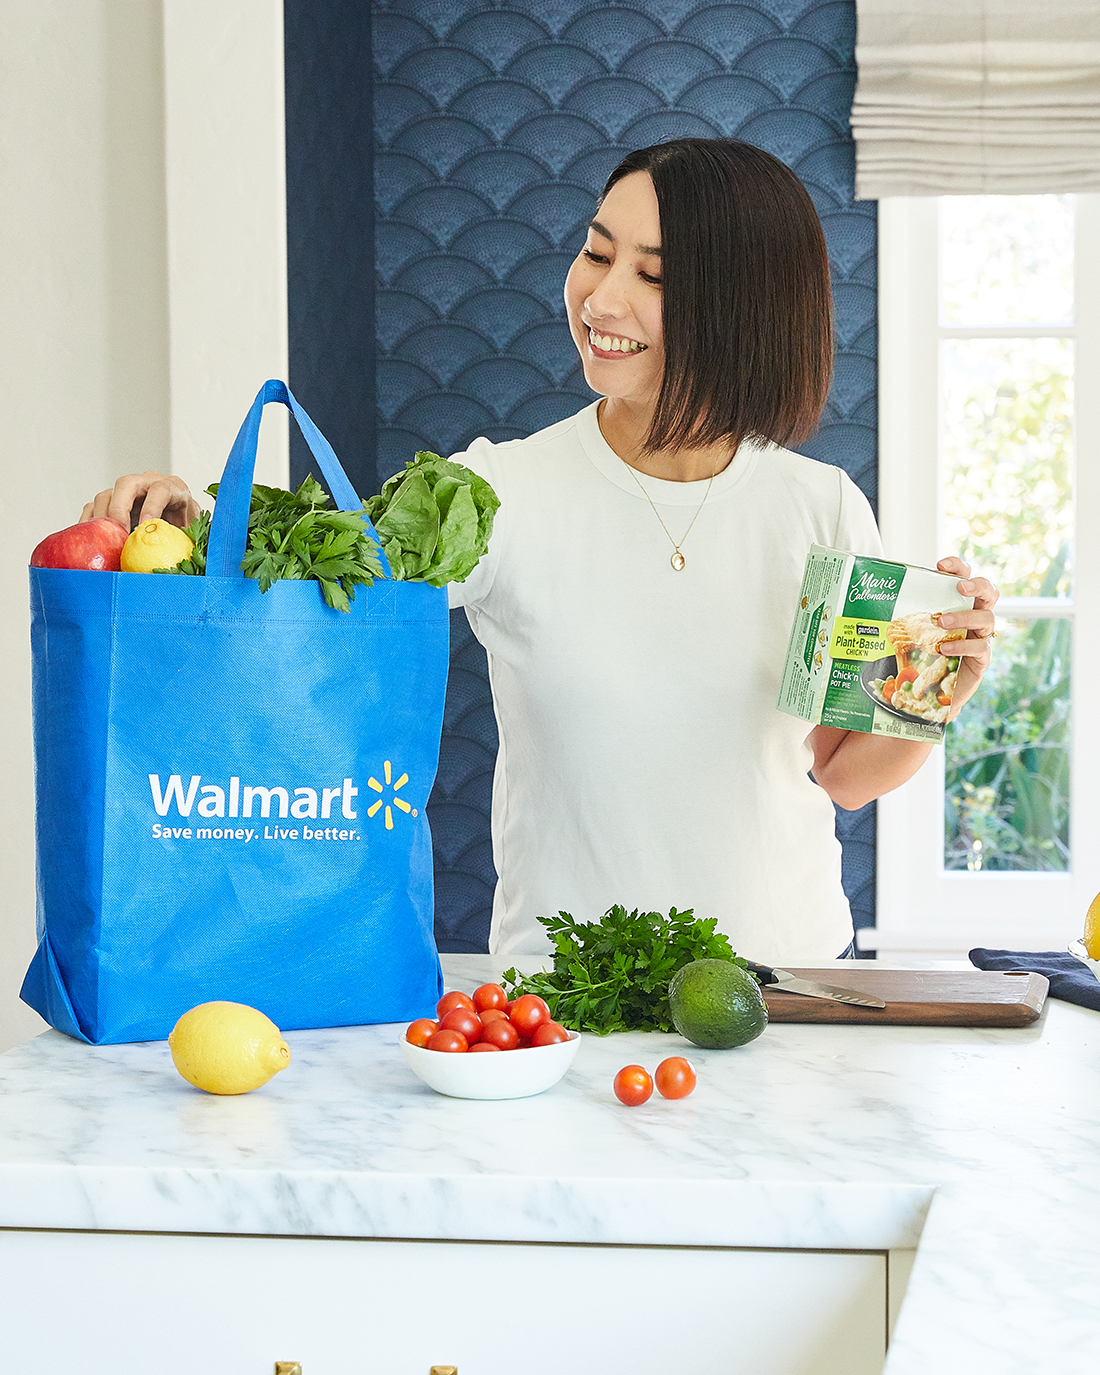 Rie posing with the bag of Walmart grocery ingredients for the meal